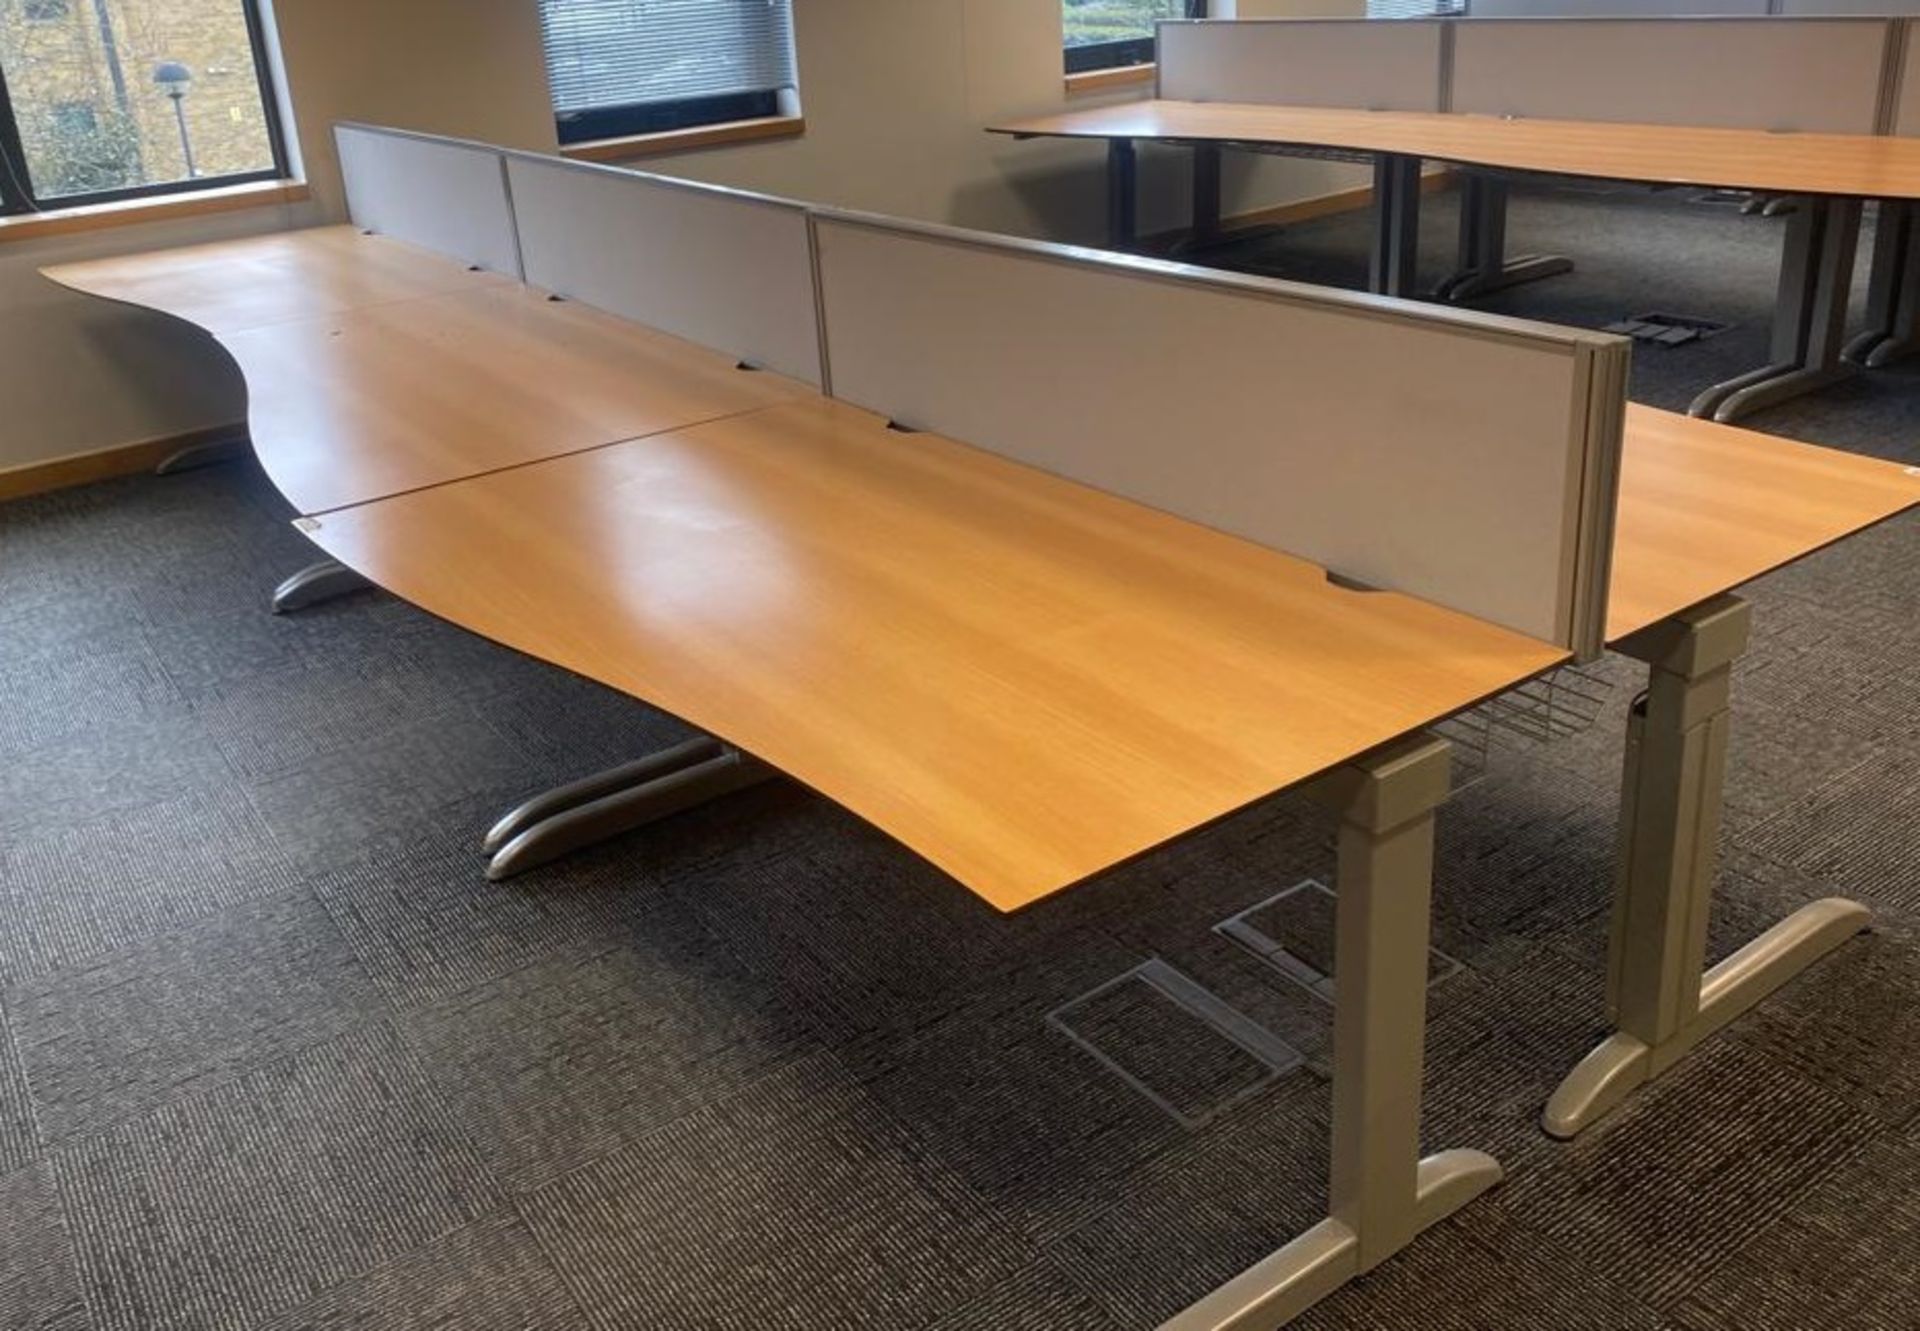 8 x Techo Wave Office Desks With Privacy Panels and Cable Tidy Cages - Beech Wood Finish with Grey - Image 6 of 20